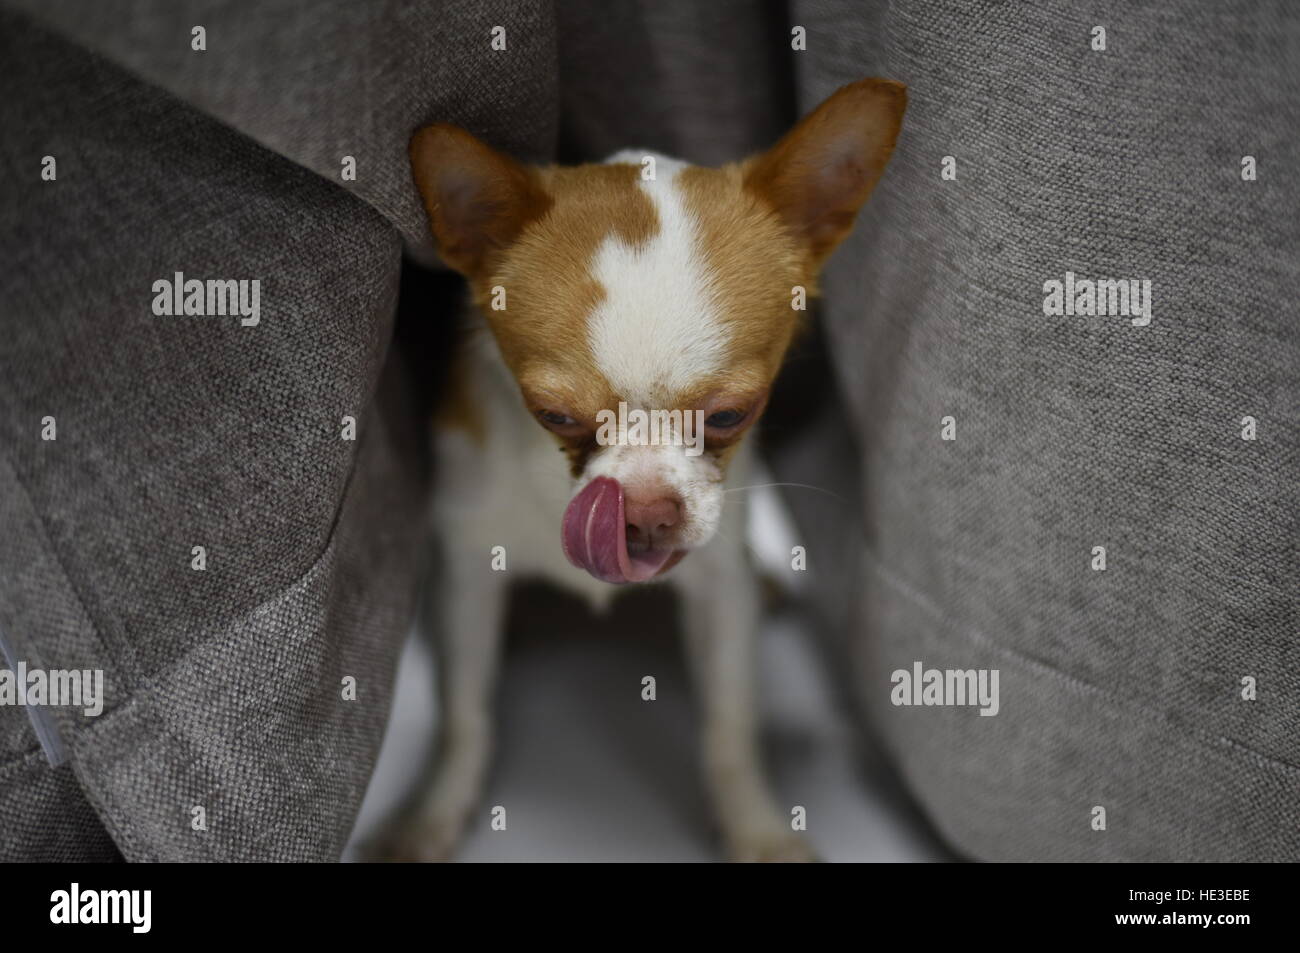 pet dog brown white chihuahua big eyes standing puppy Stock Photo